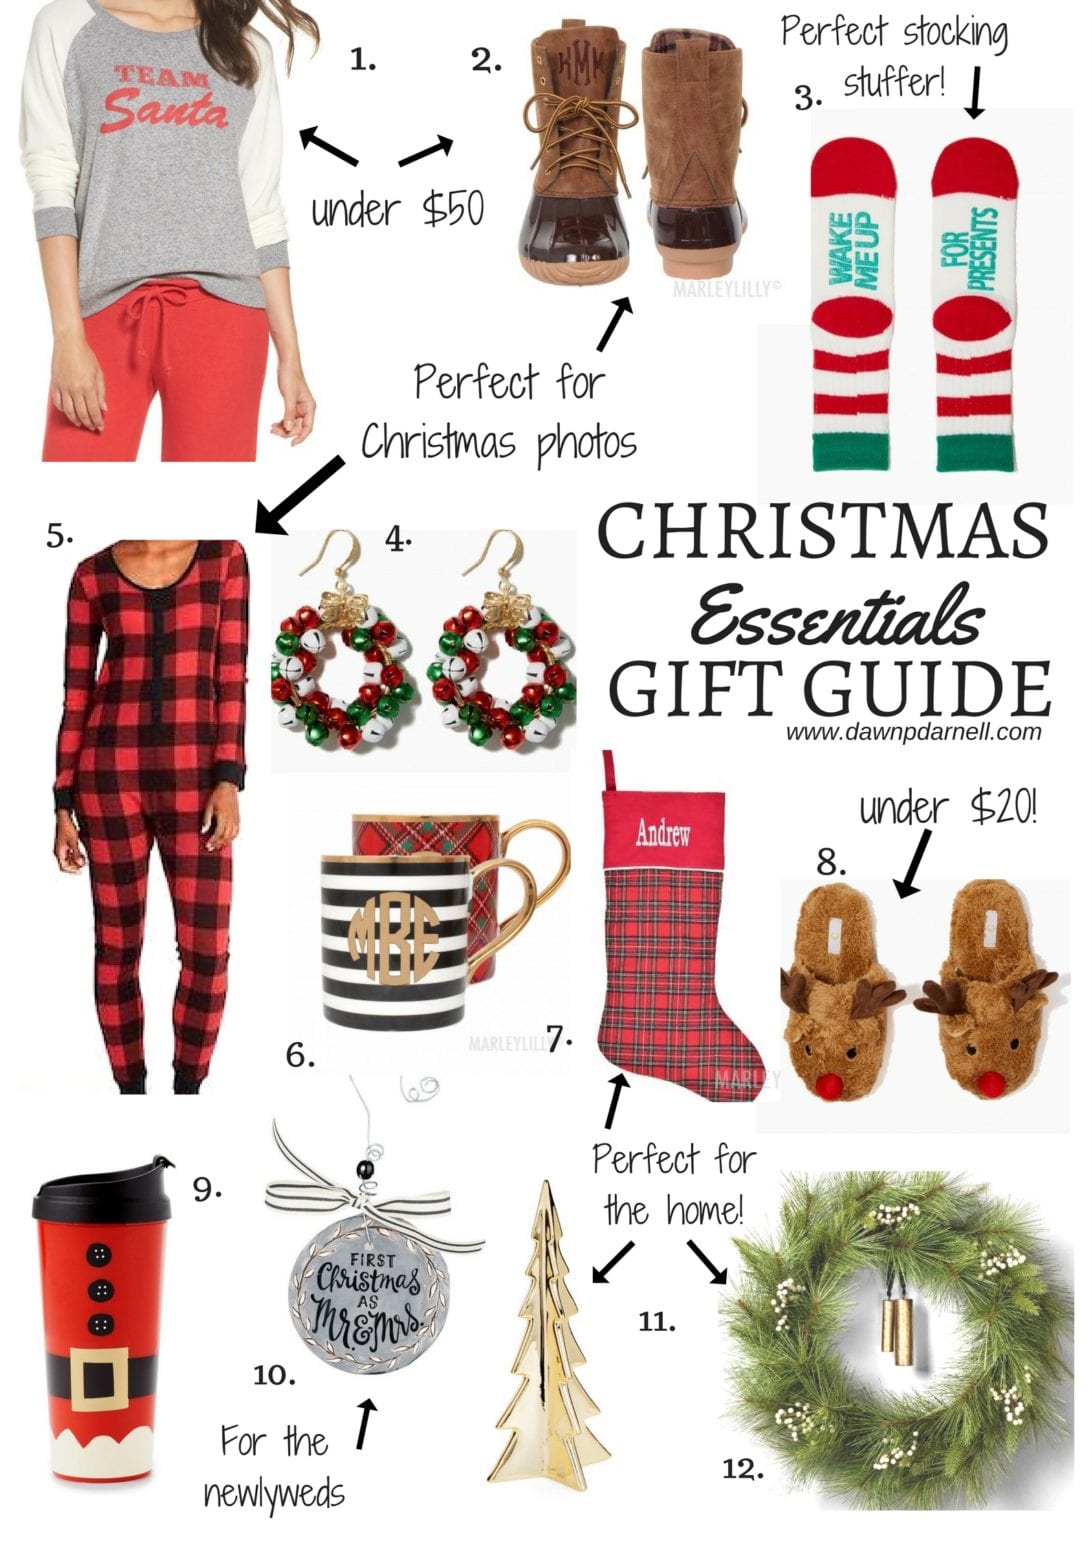 1. Team Santa Raglan Sweatshirt  2. Monogrammed Duck Boots  3. Wake Me Up For Presents Socks  4. Jingle Bell Wreath Earrings  5. Thermal Onesie for Women  6. Personalized Coffee Mug  7. Monogrammed Stocking   8. Reindeer Slip-on Slippers  9. holiday village thermal mug  10. Our First Christmas Ceramic Ornament  11. Gold Porcelain Tree  12. Pine Wreath from Heart & Hand Magnolia, christmas gift guide, christmas decor, family matching pjs, buffalo plaid pjs, buffalo plaid dress, buffalo plaid pj for toddlers, buffalo plaid dress, christmas outfit ,